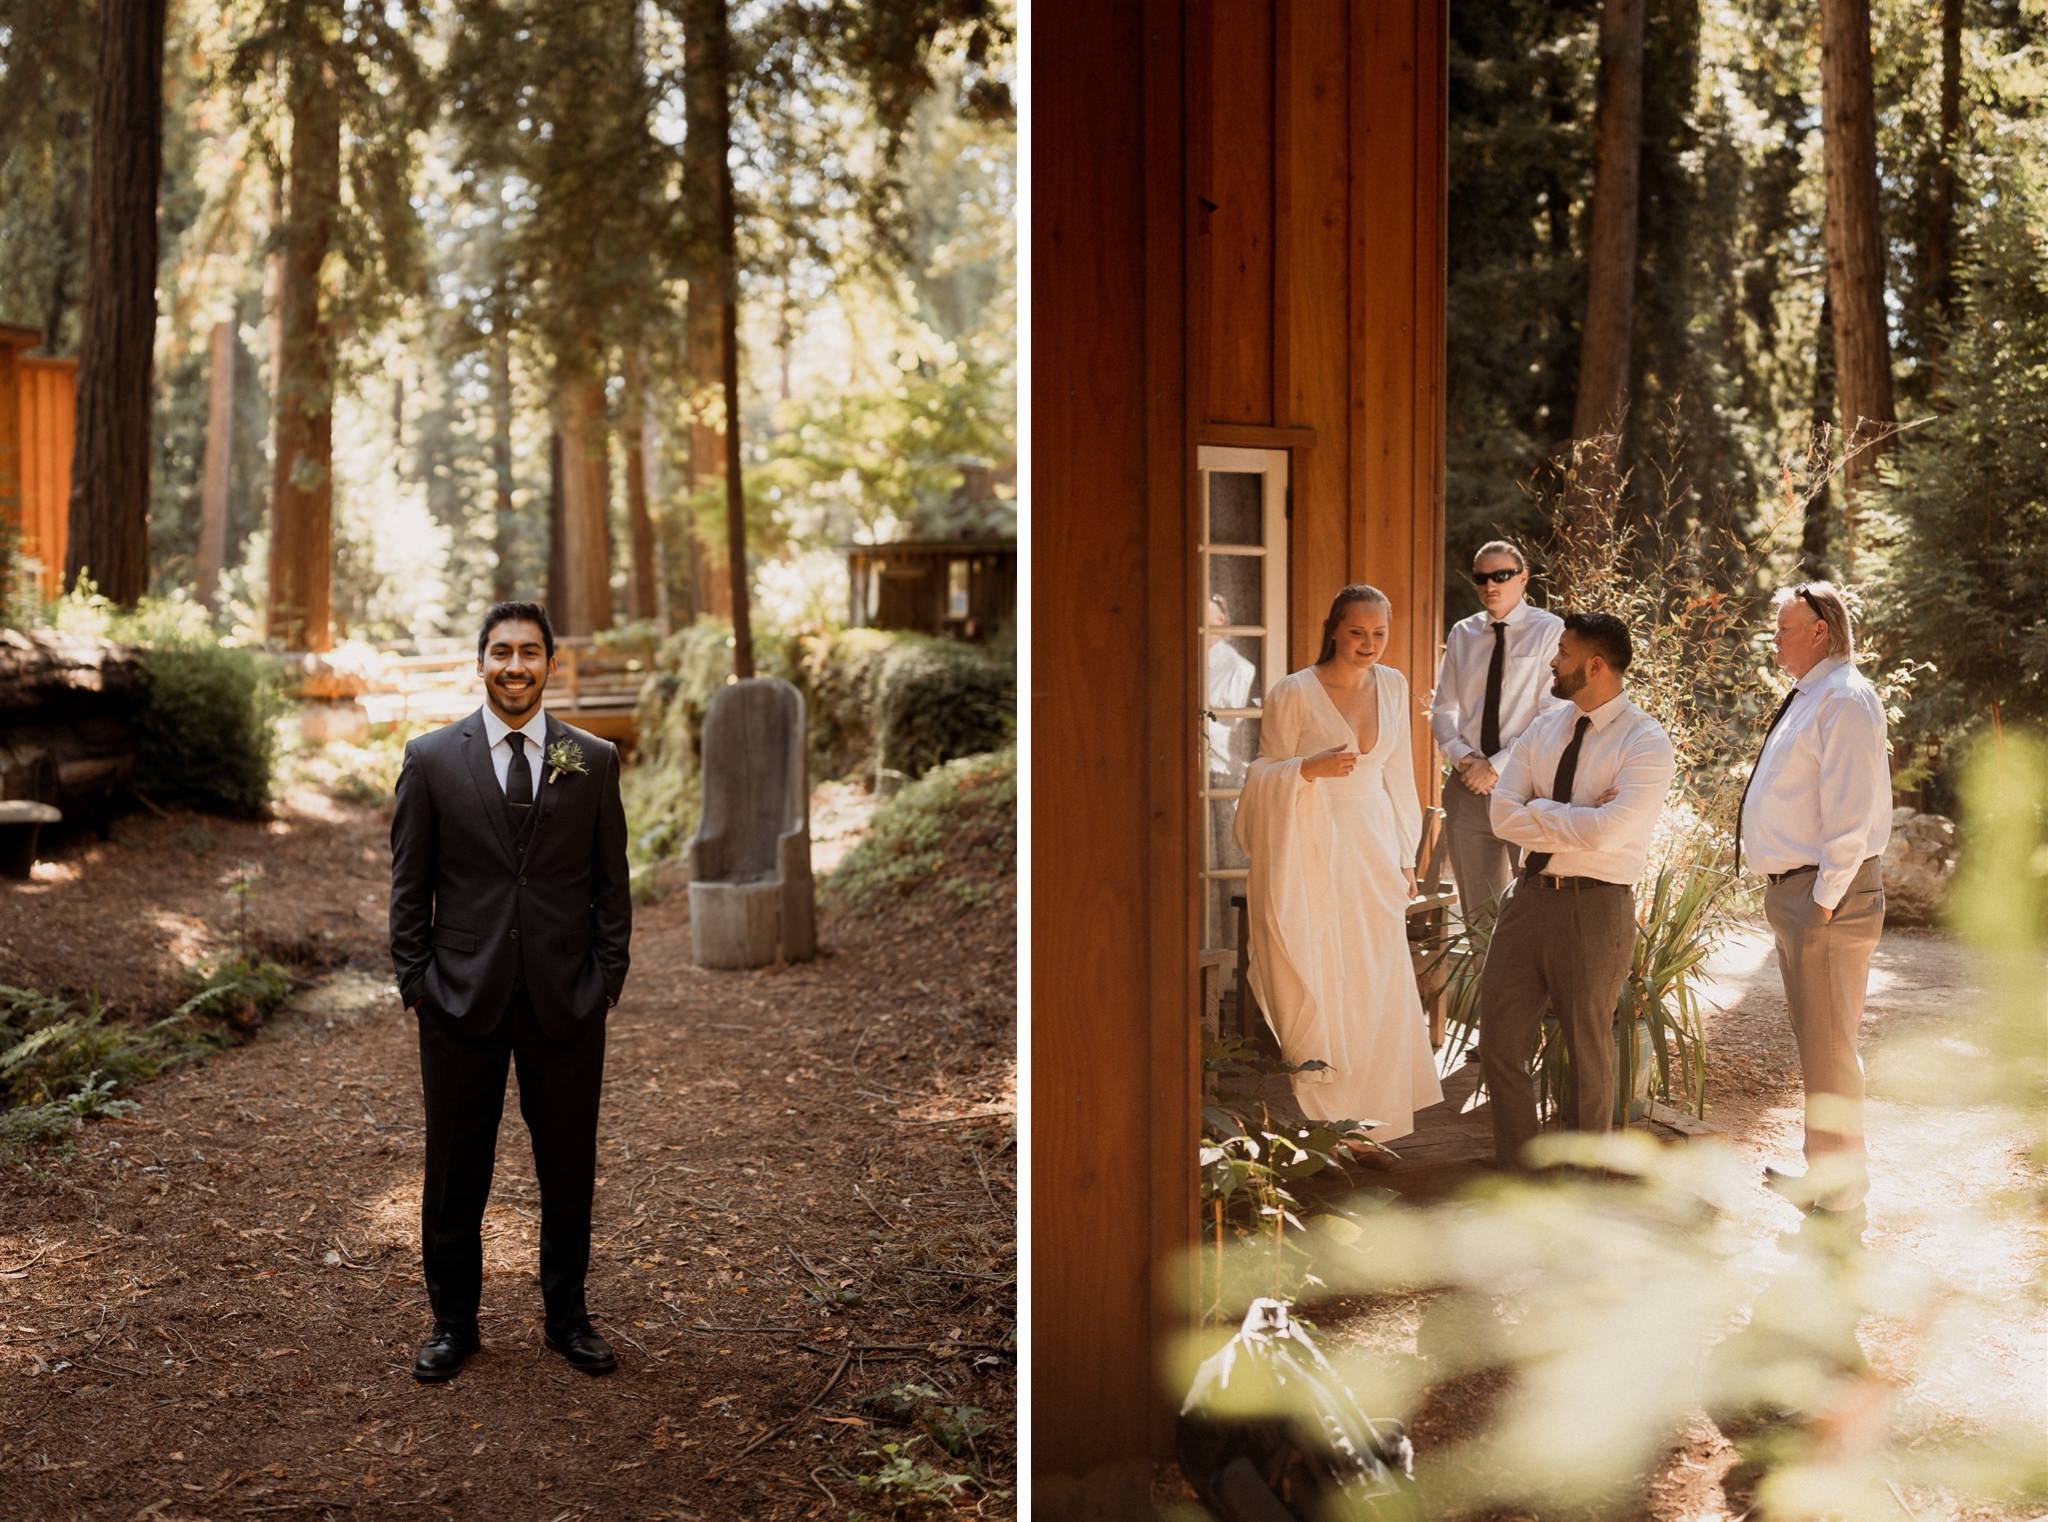 020_Two-Day Big Sur Redwoods Elopement with Family_Will Khoury Elopement Photographer.jpg